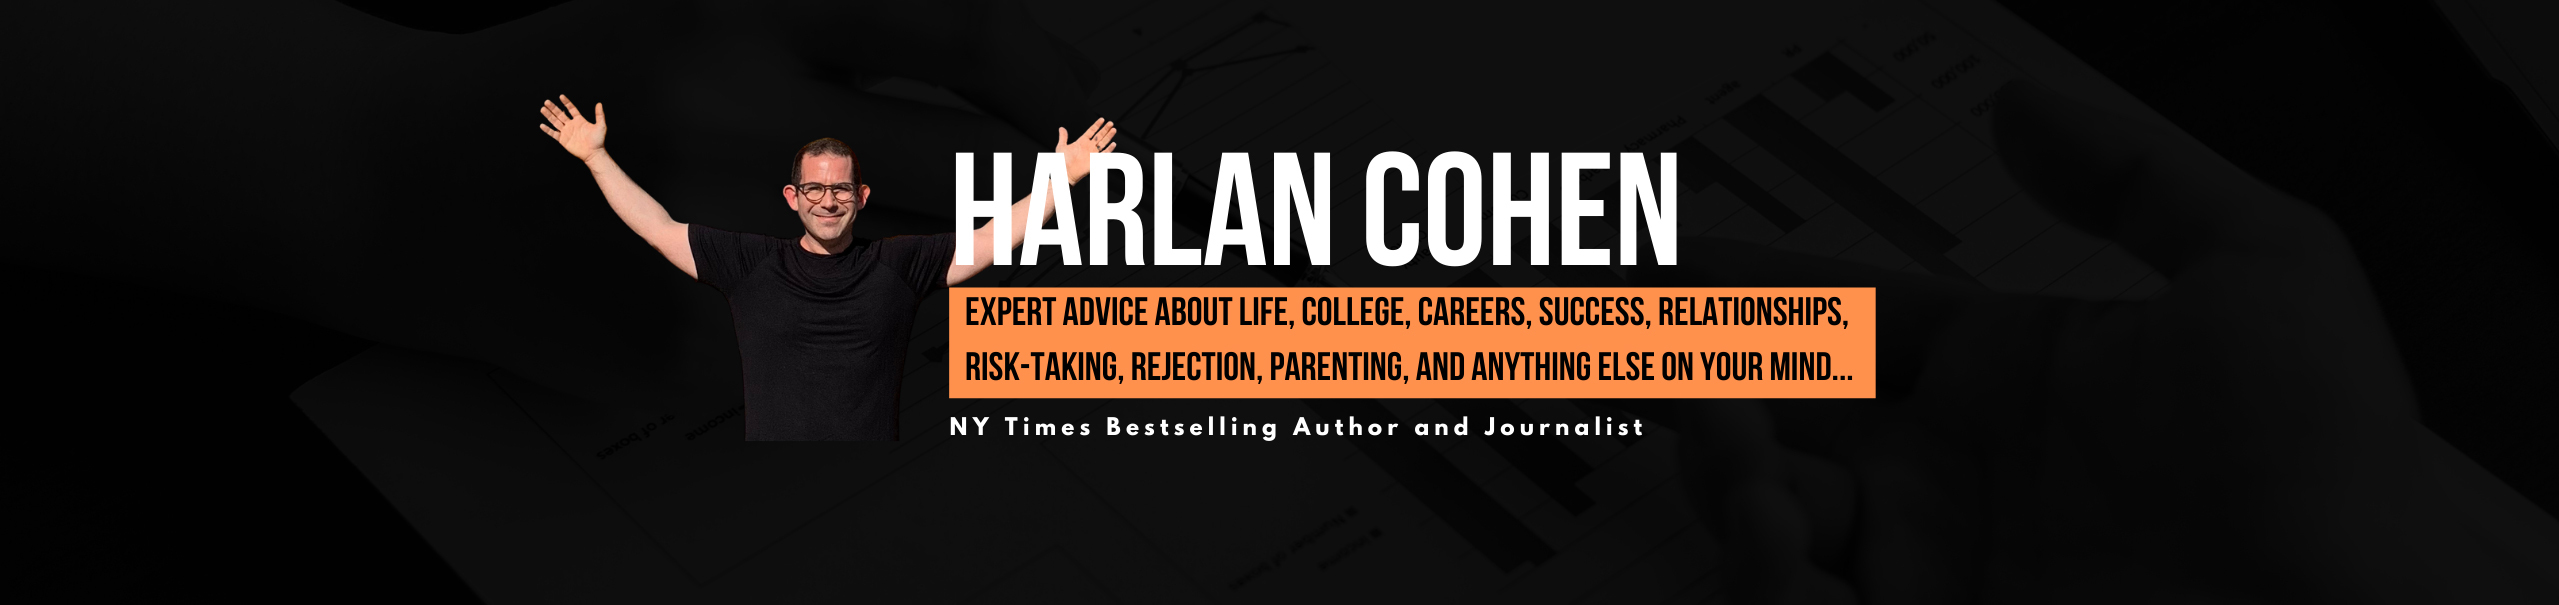 The Harlan Cohen Podcast